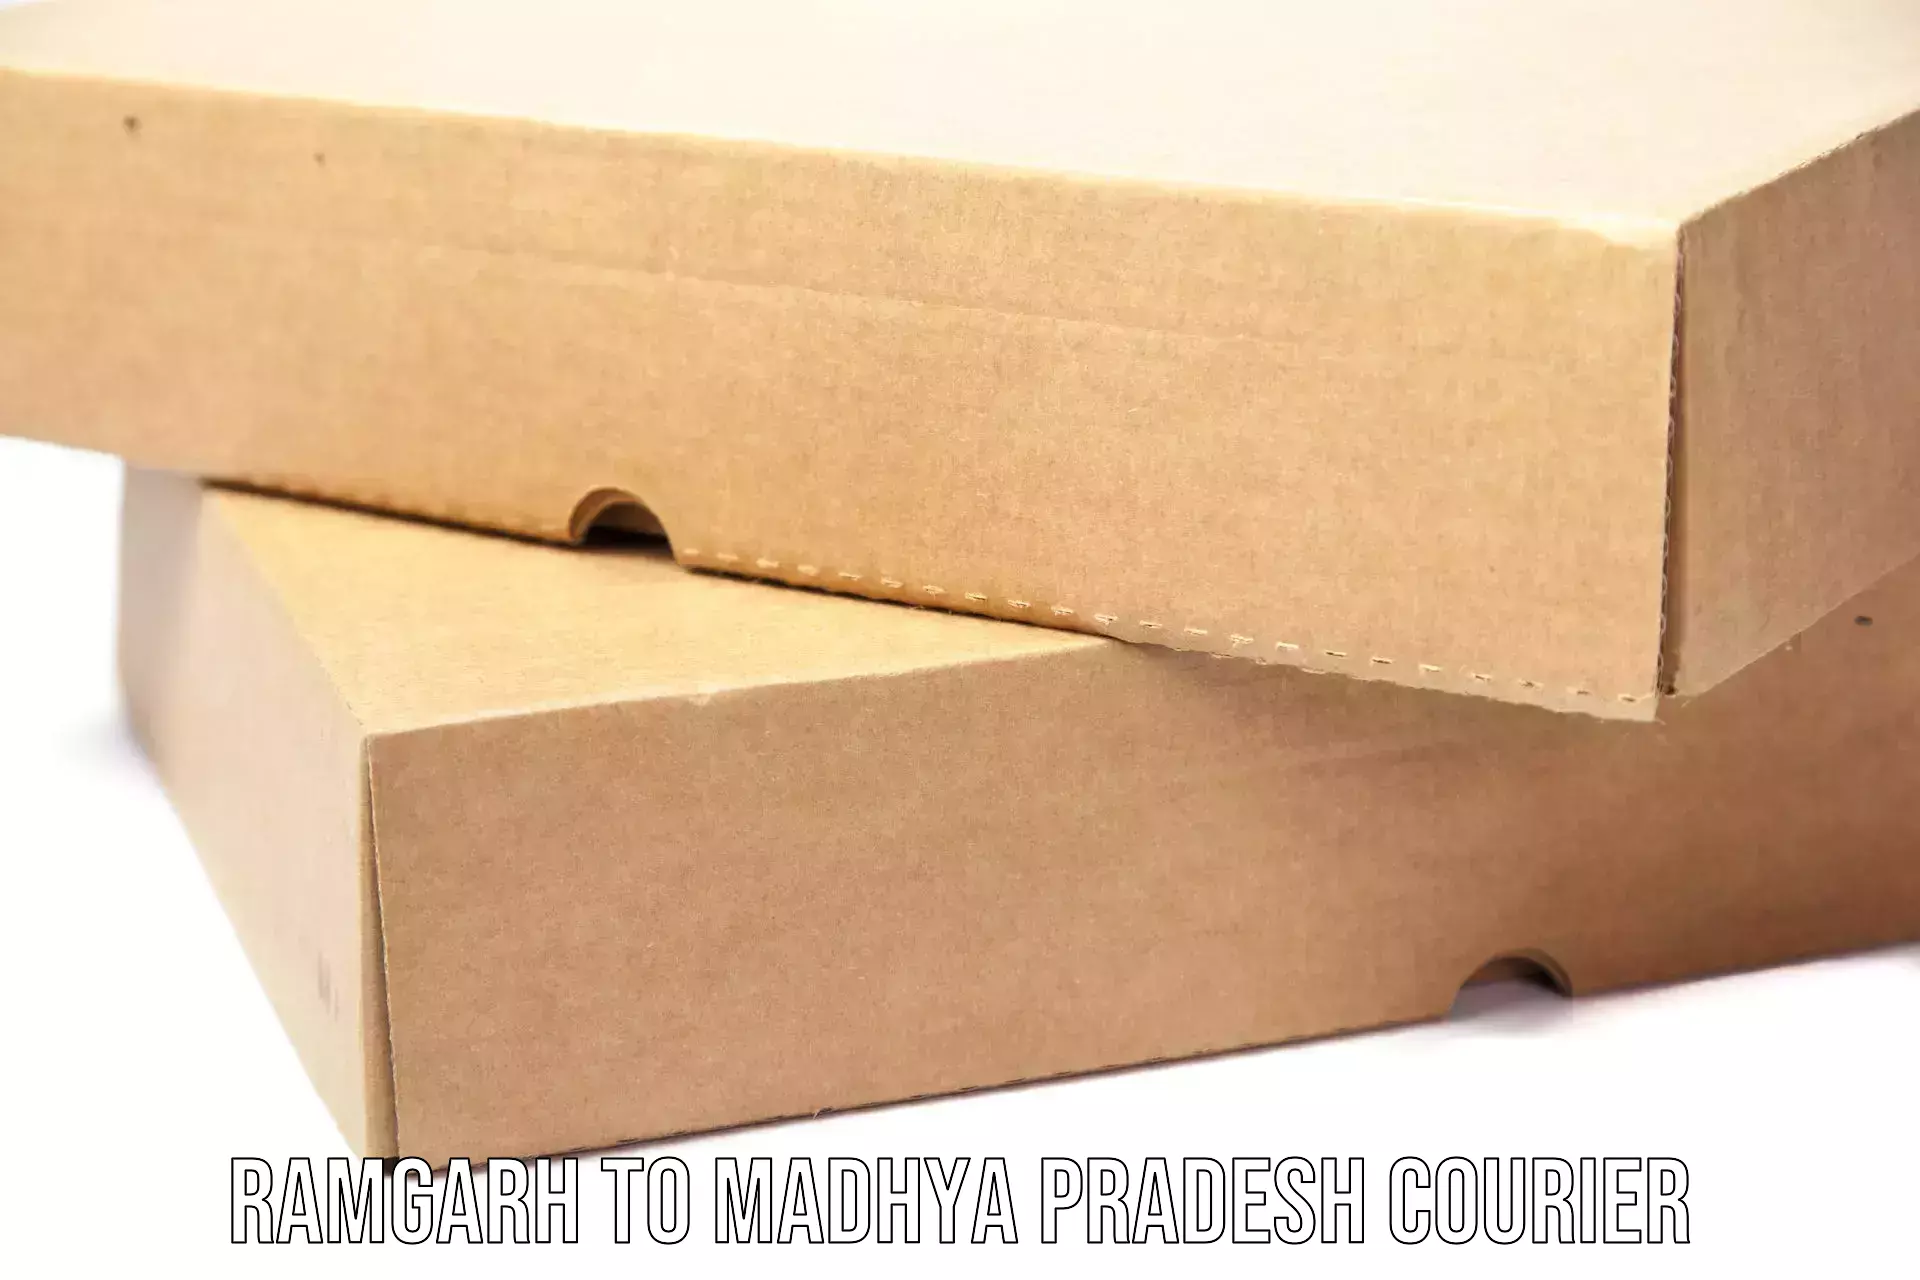 Quality courier services in Ramgarh to Madhya Pradesh